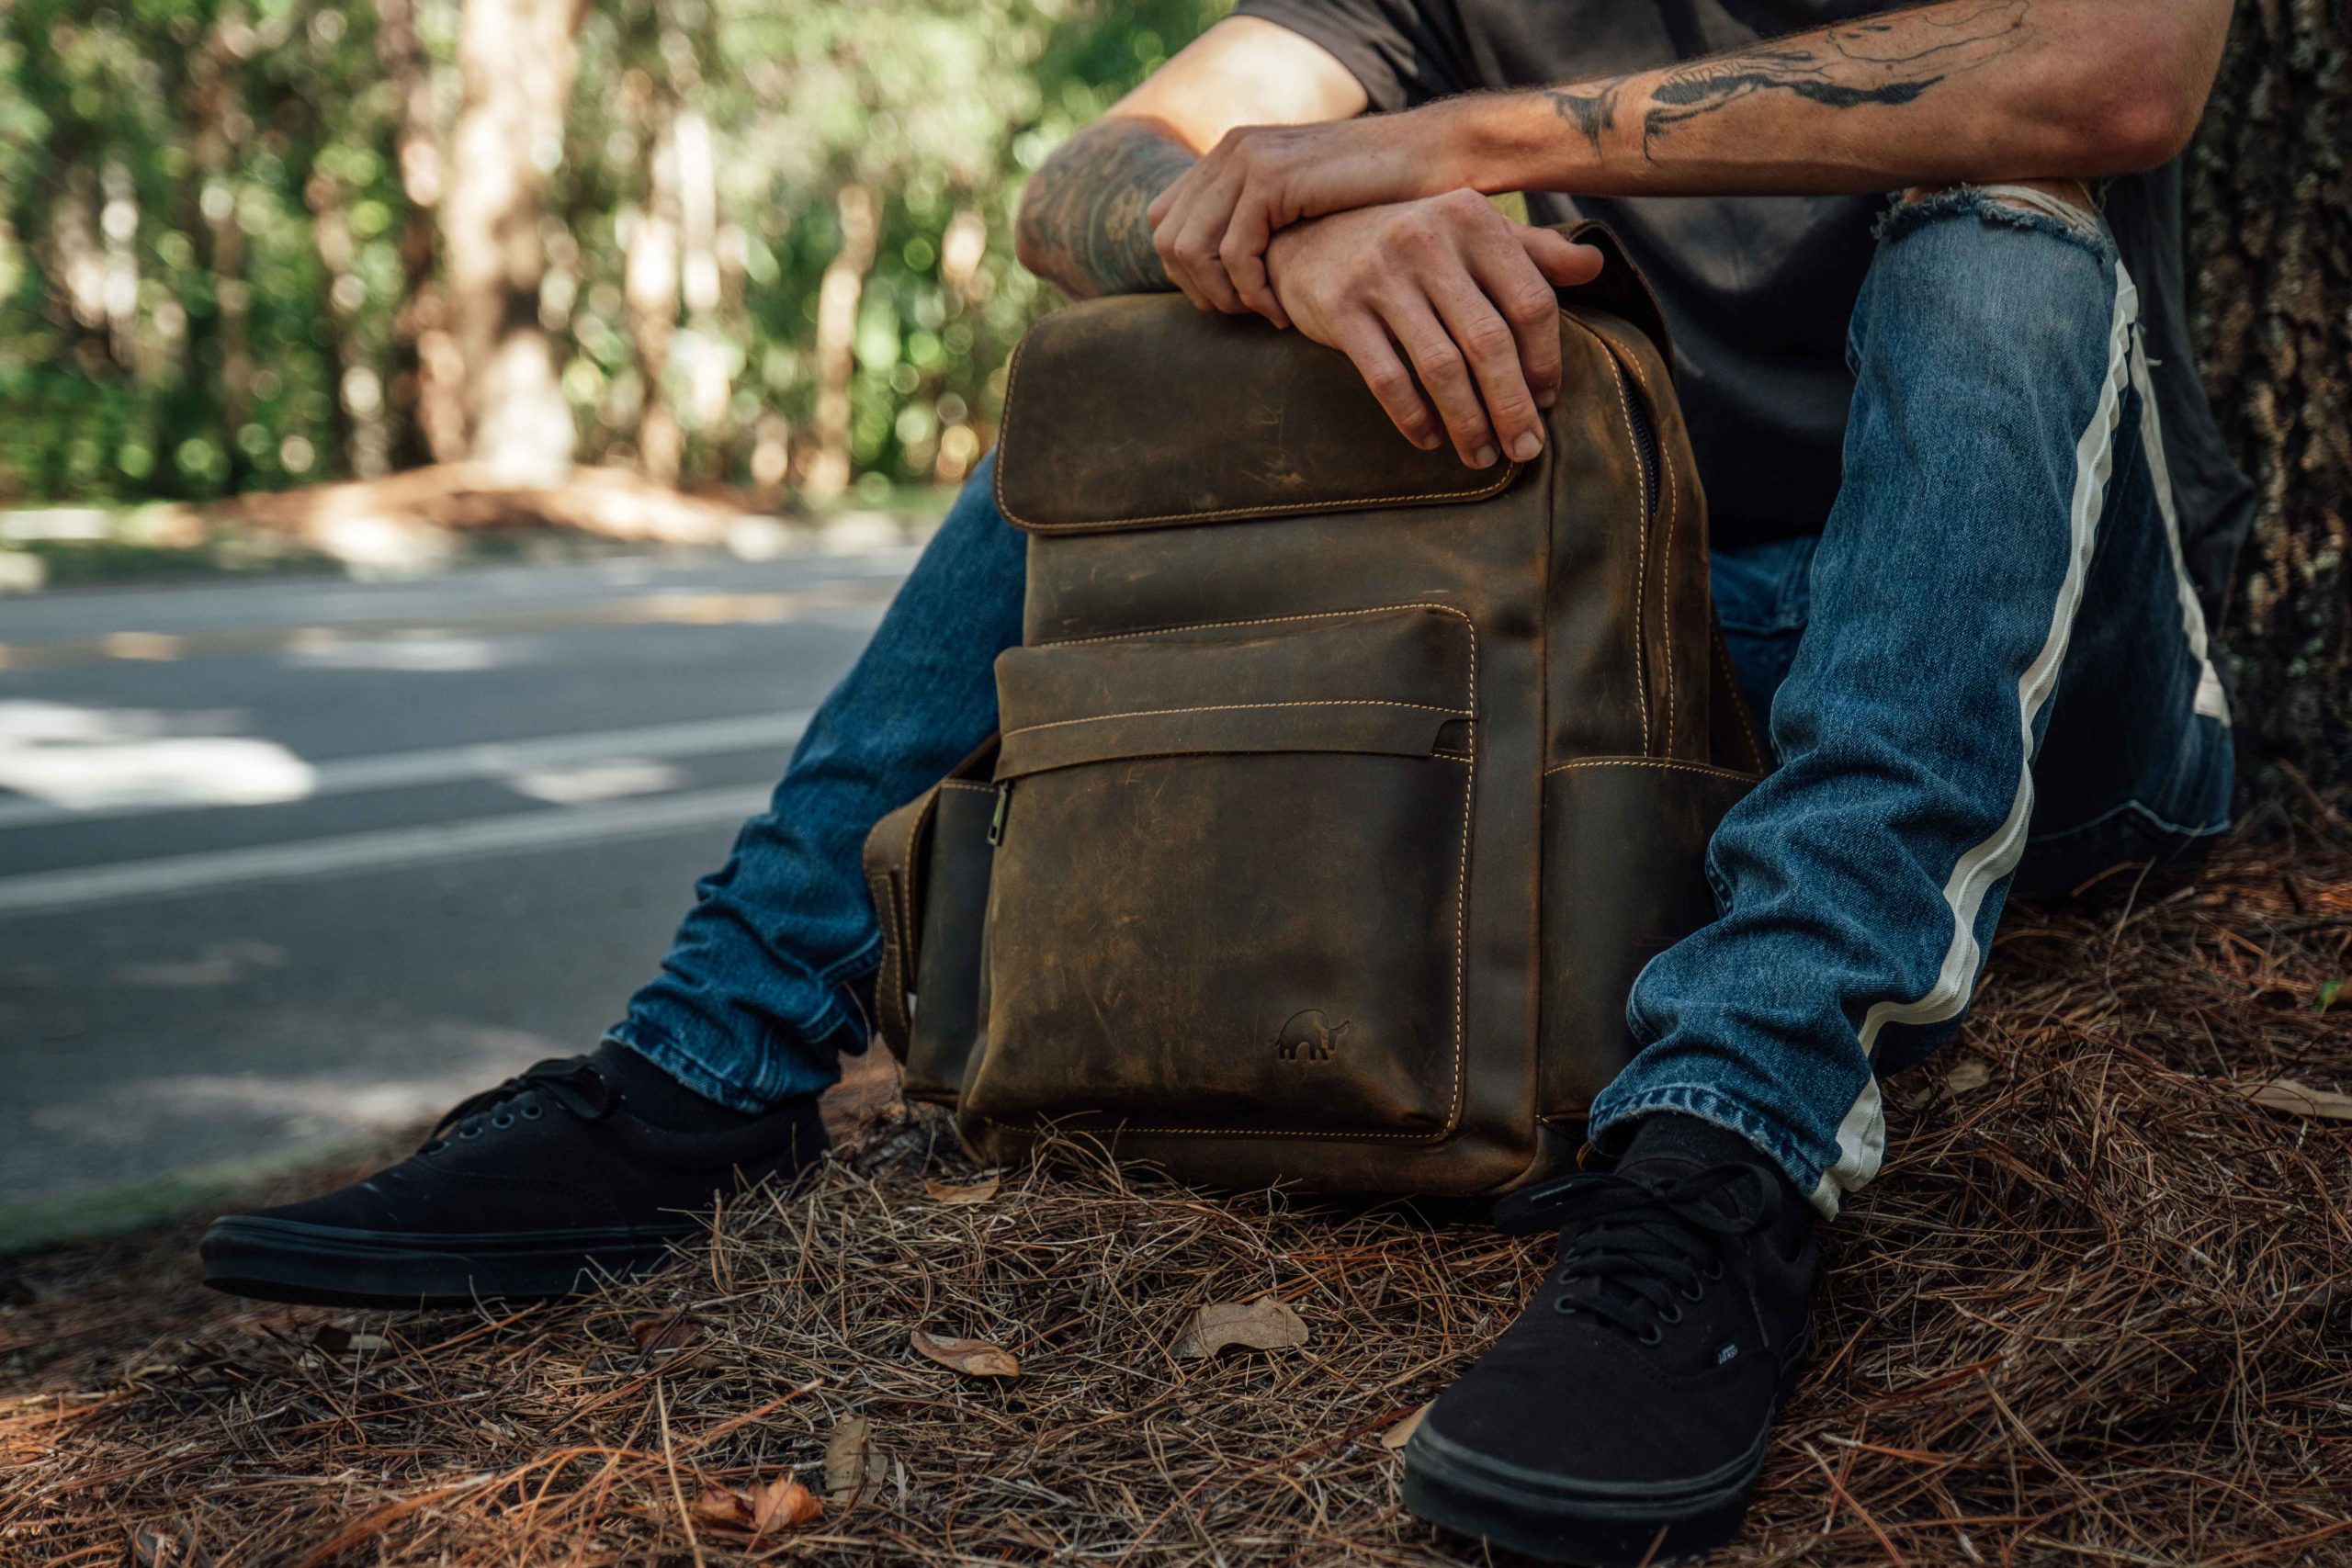 The Bullstrap Leather Rugged Backpack is top notch quality and perfect for dads who want to lug around their stuff in style. Image courtesy of Bullstrap